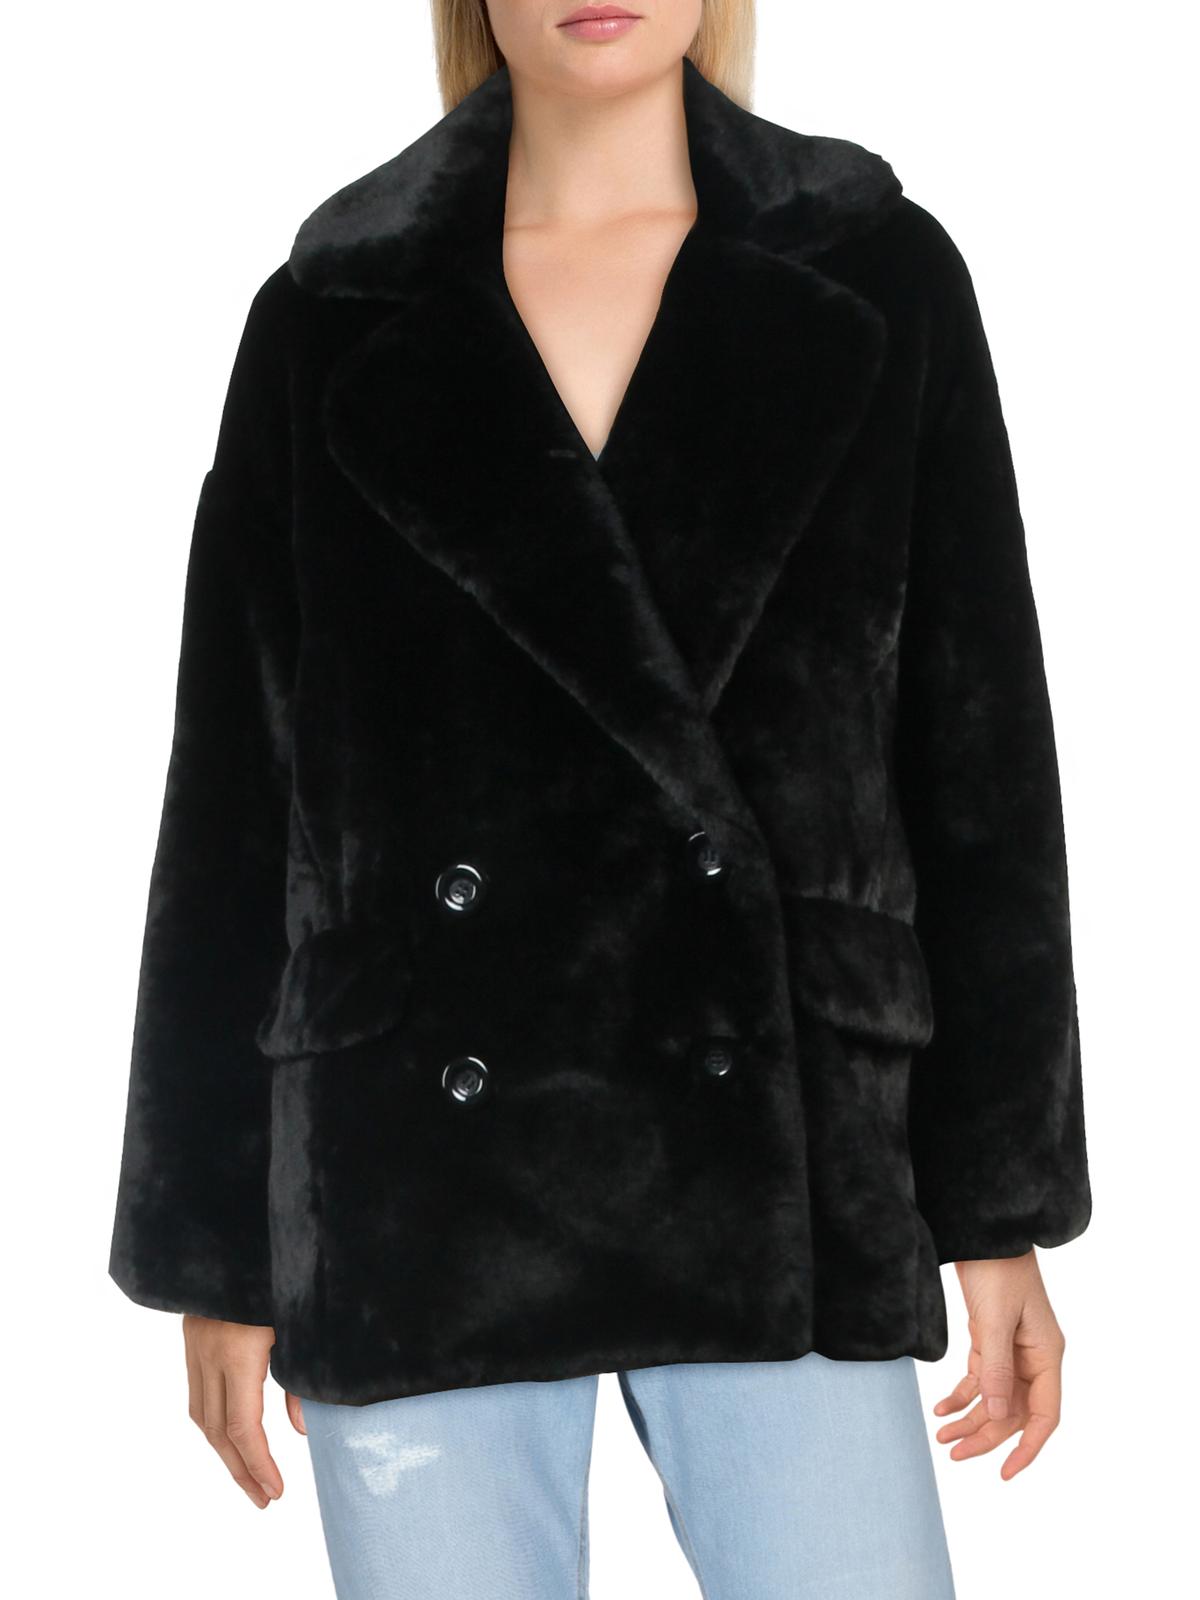 Free People Womens Kate Winter Double-Breasted Faux Fur Coat Black S - image 1 of 2